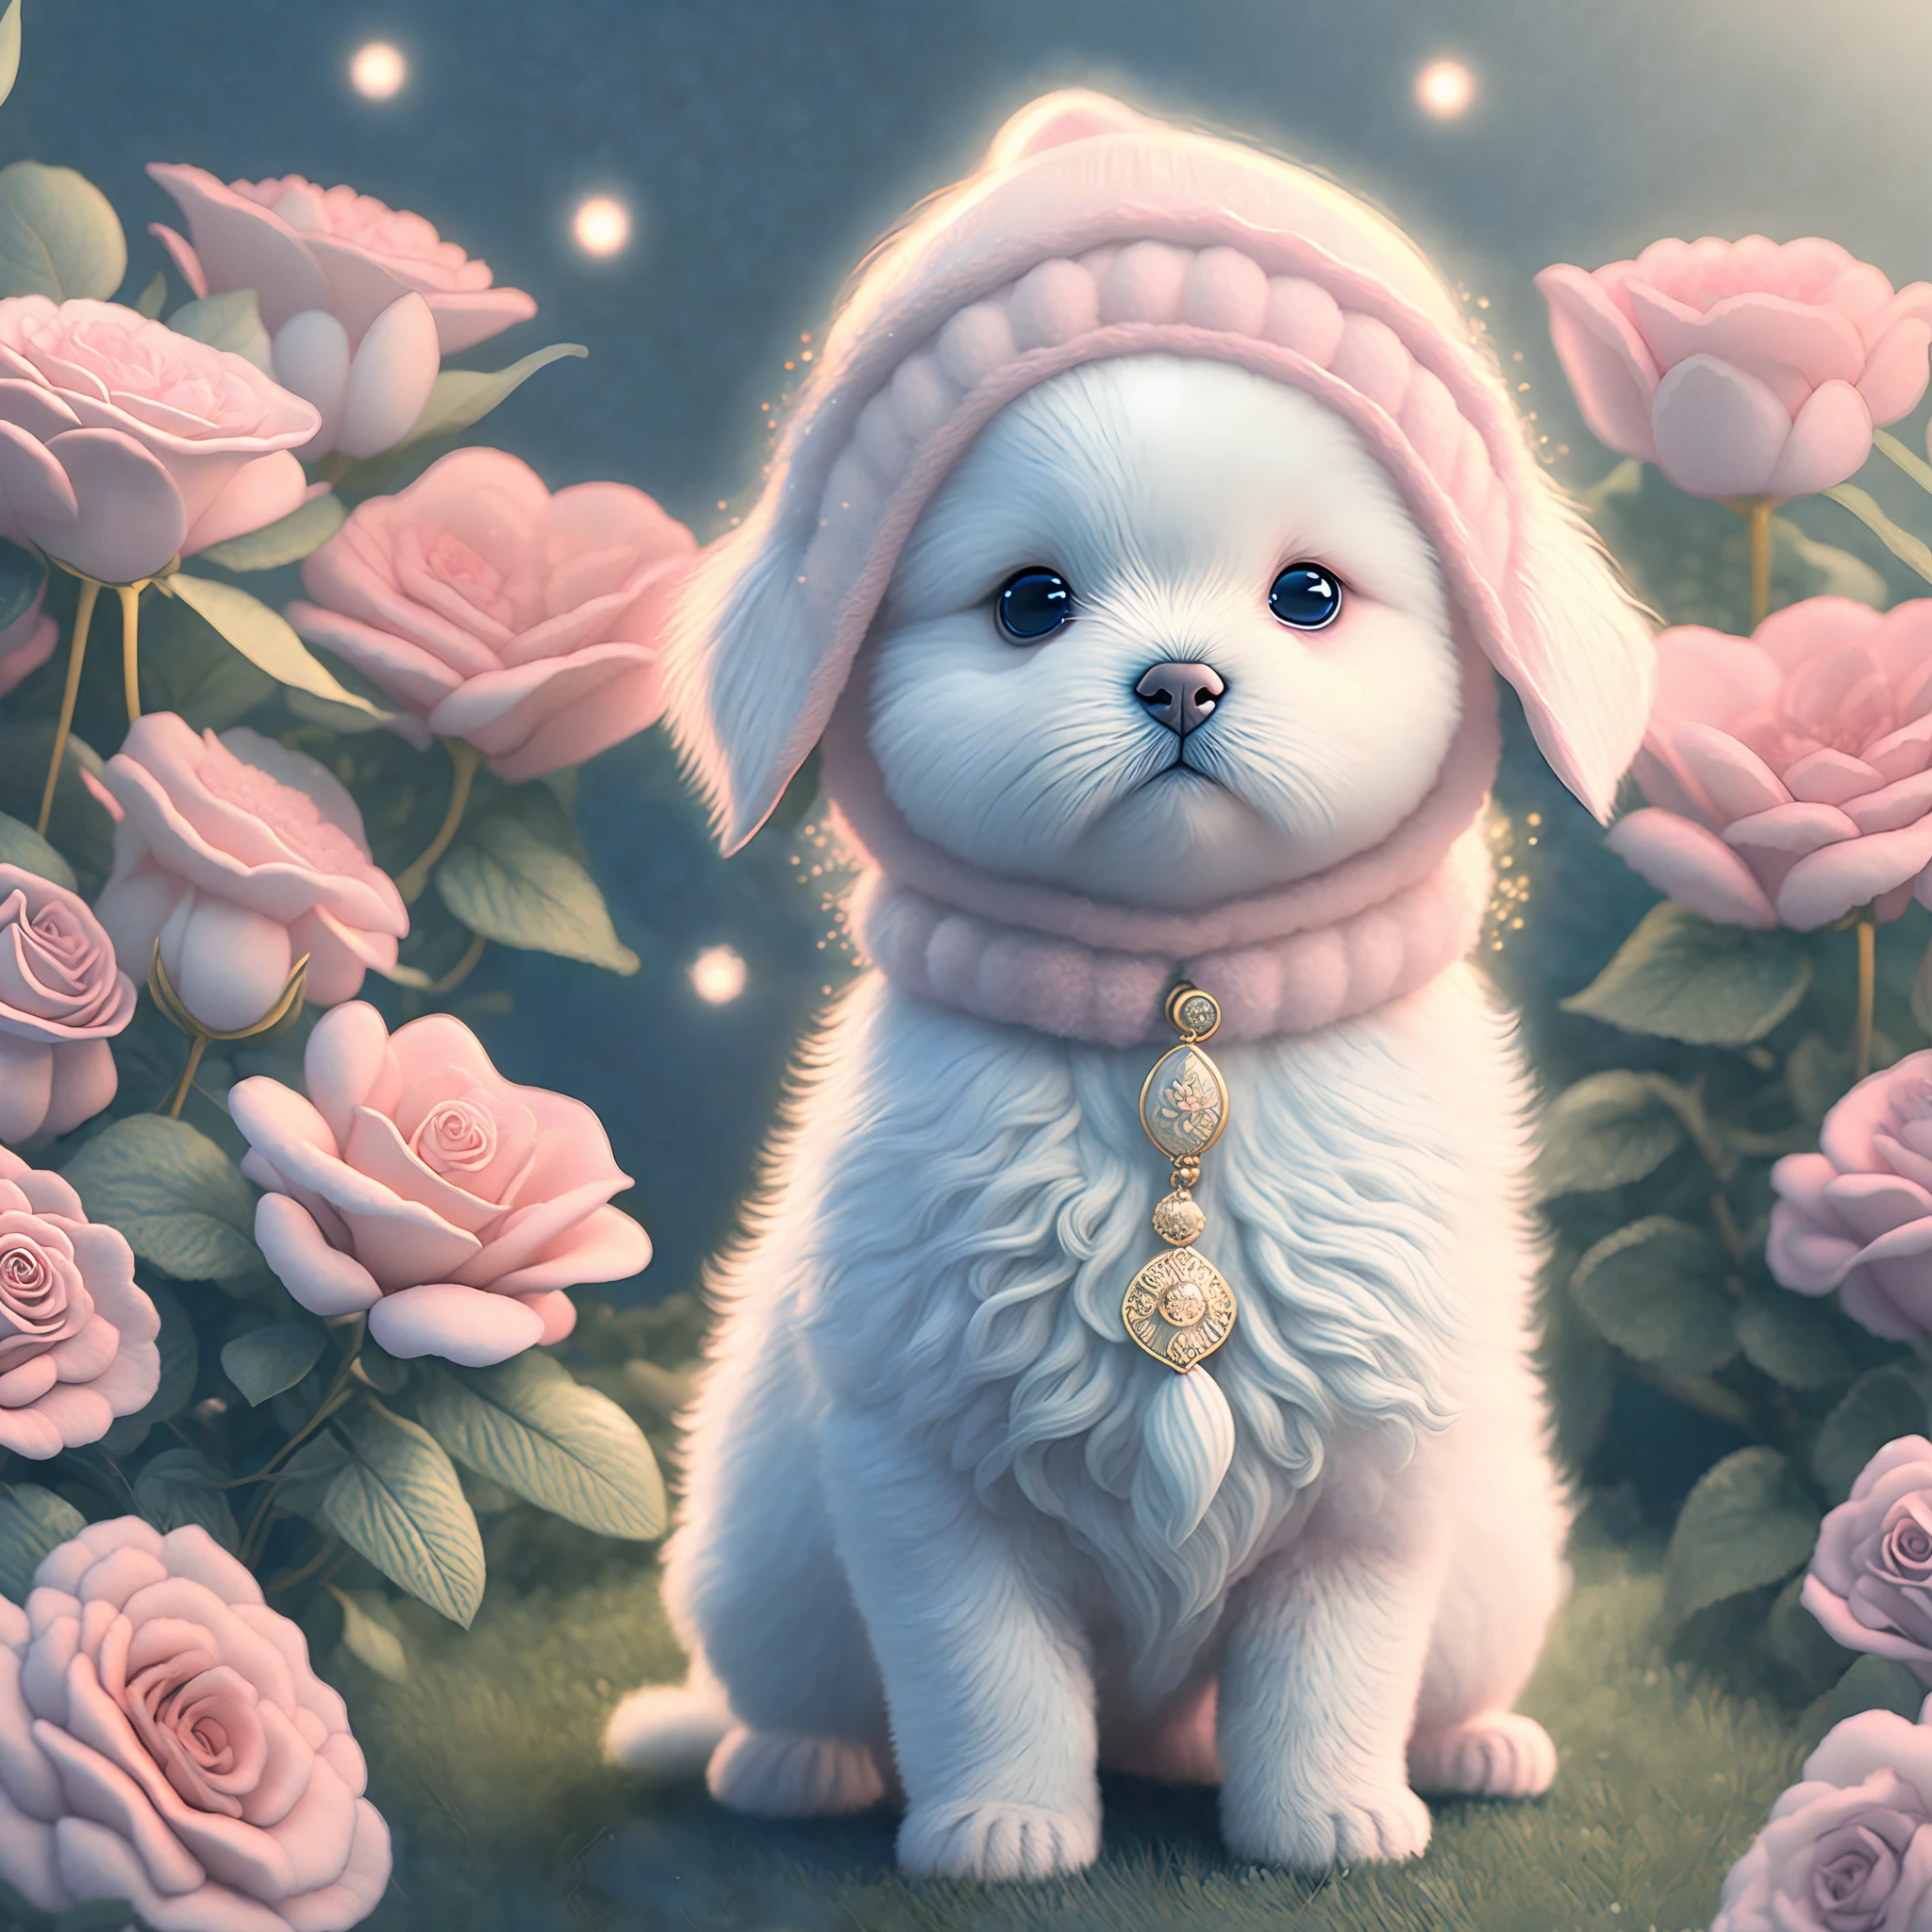 In this ultra-detailed CG art, the adorable puppy surrounded by ethereal roses, best quality, high resolution, intricate details, fantasy, cute animals